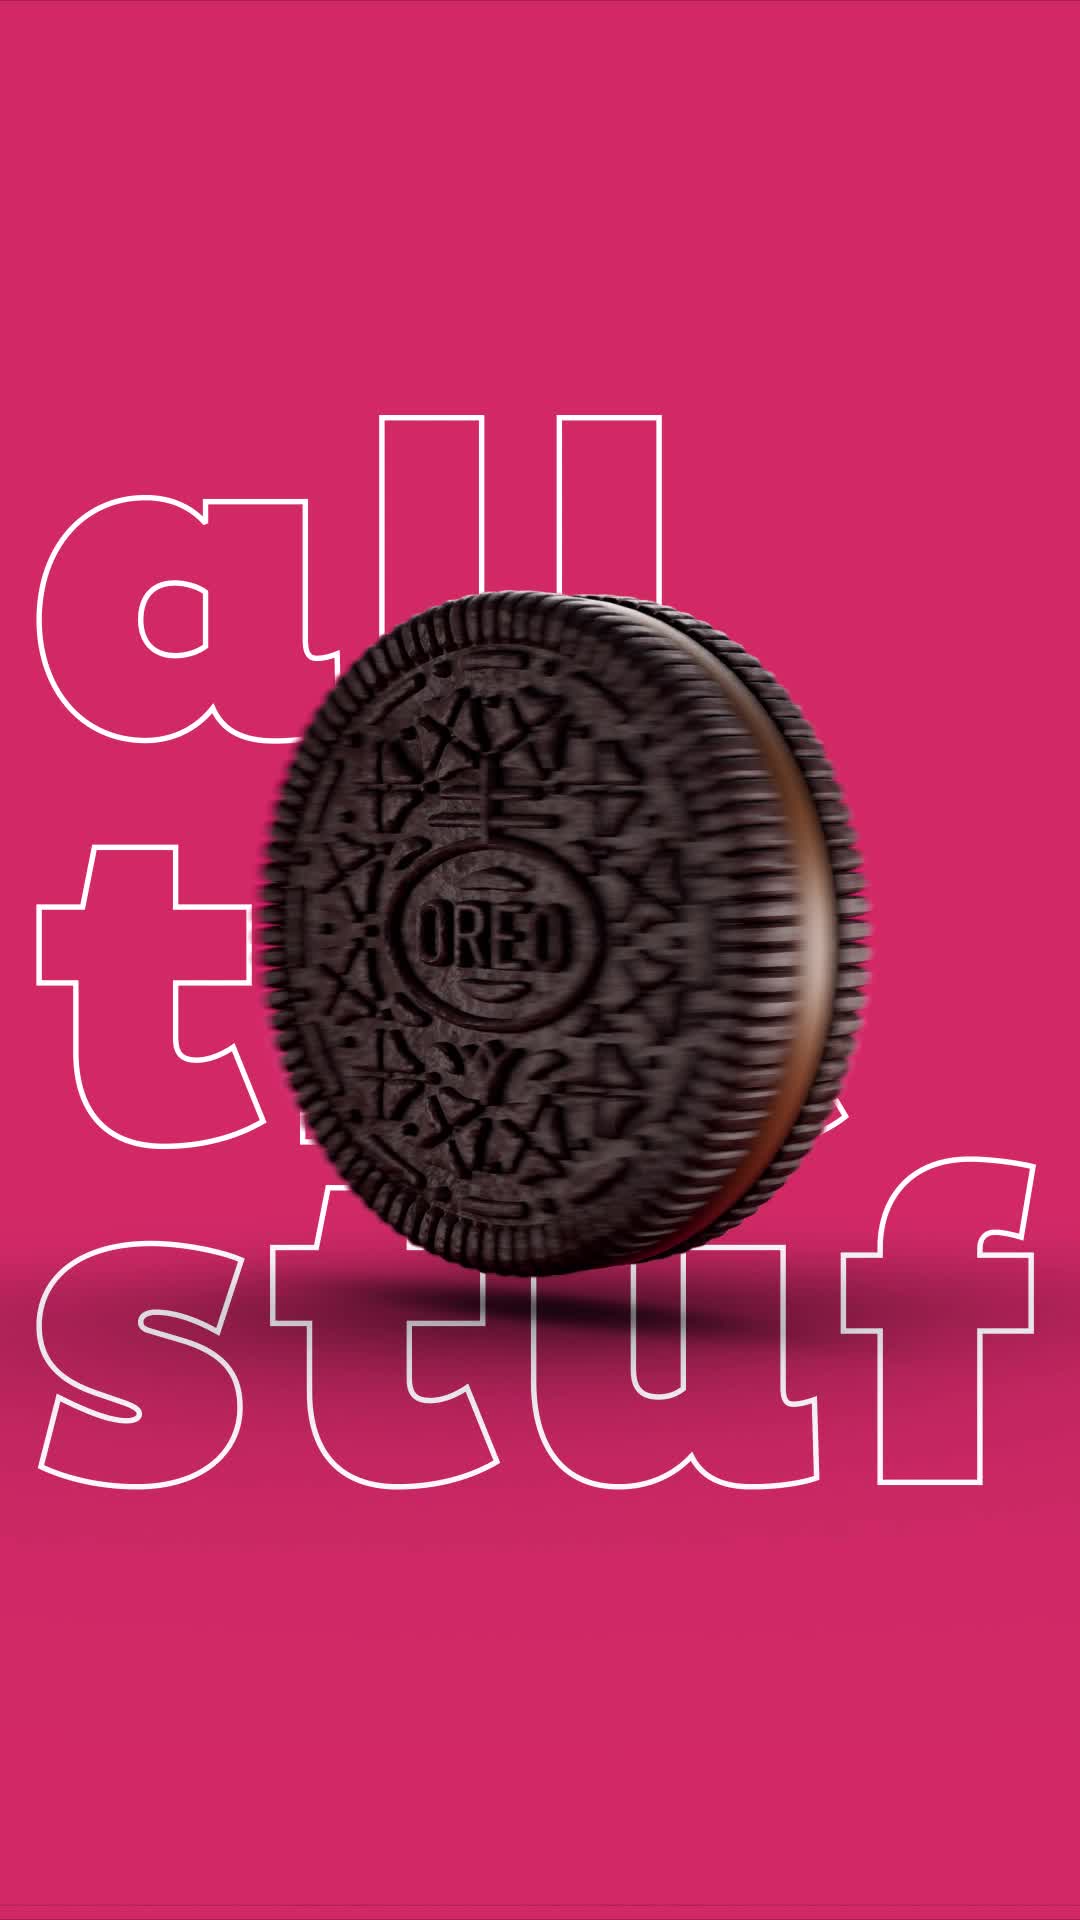 Oreo All The Stuff wallpaper 1080x1920 for iPhone - Oreo